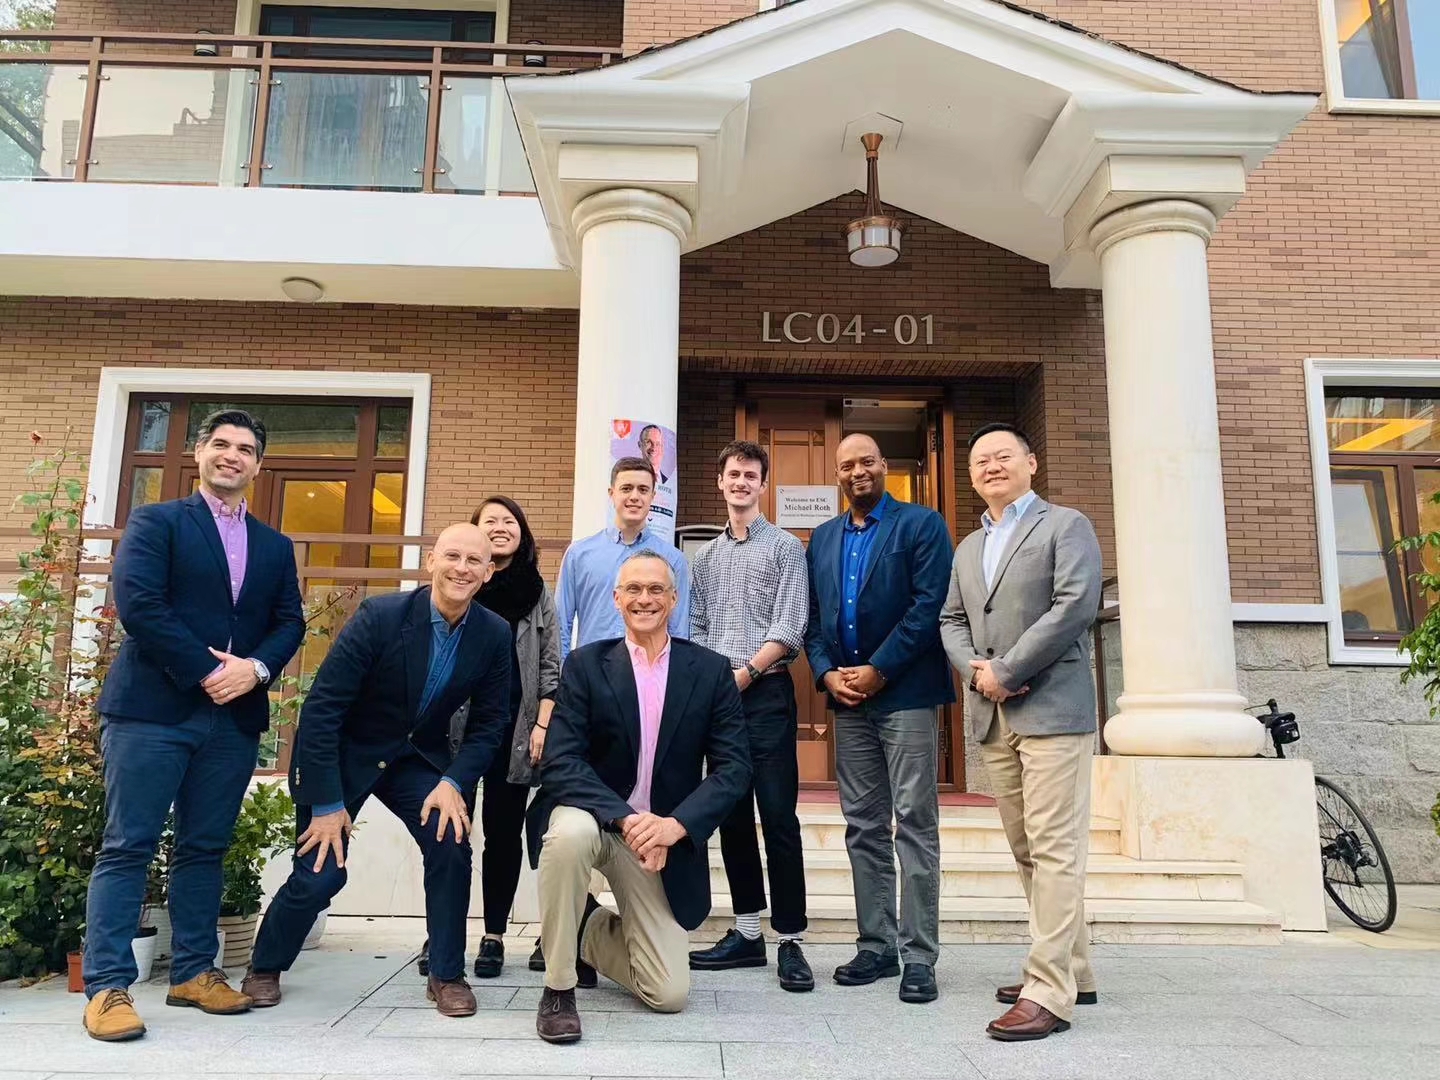 President Roth and others visited Elite Scholars of China, founded by Tomer Rothschild '94 (front center, to the left of Roth).